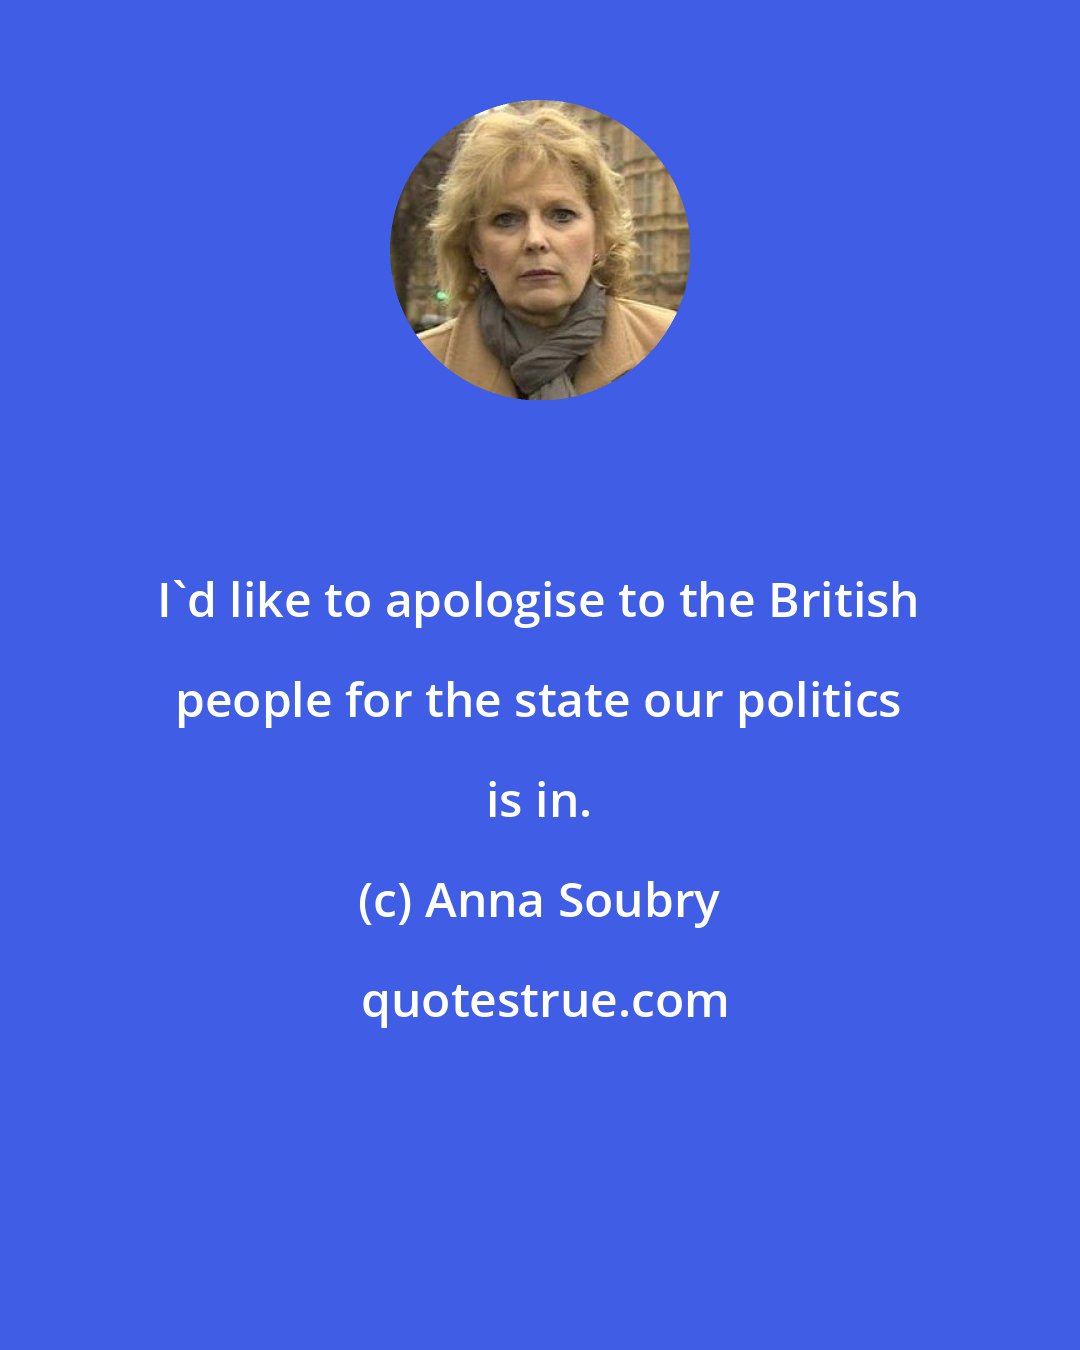 Anna Soubry: I'd like to apologise to the British people for the state our politics is in.